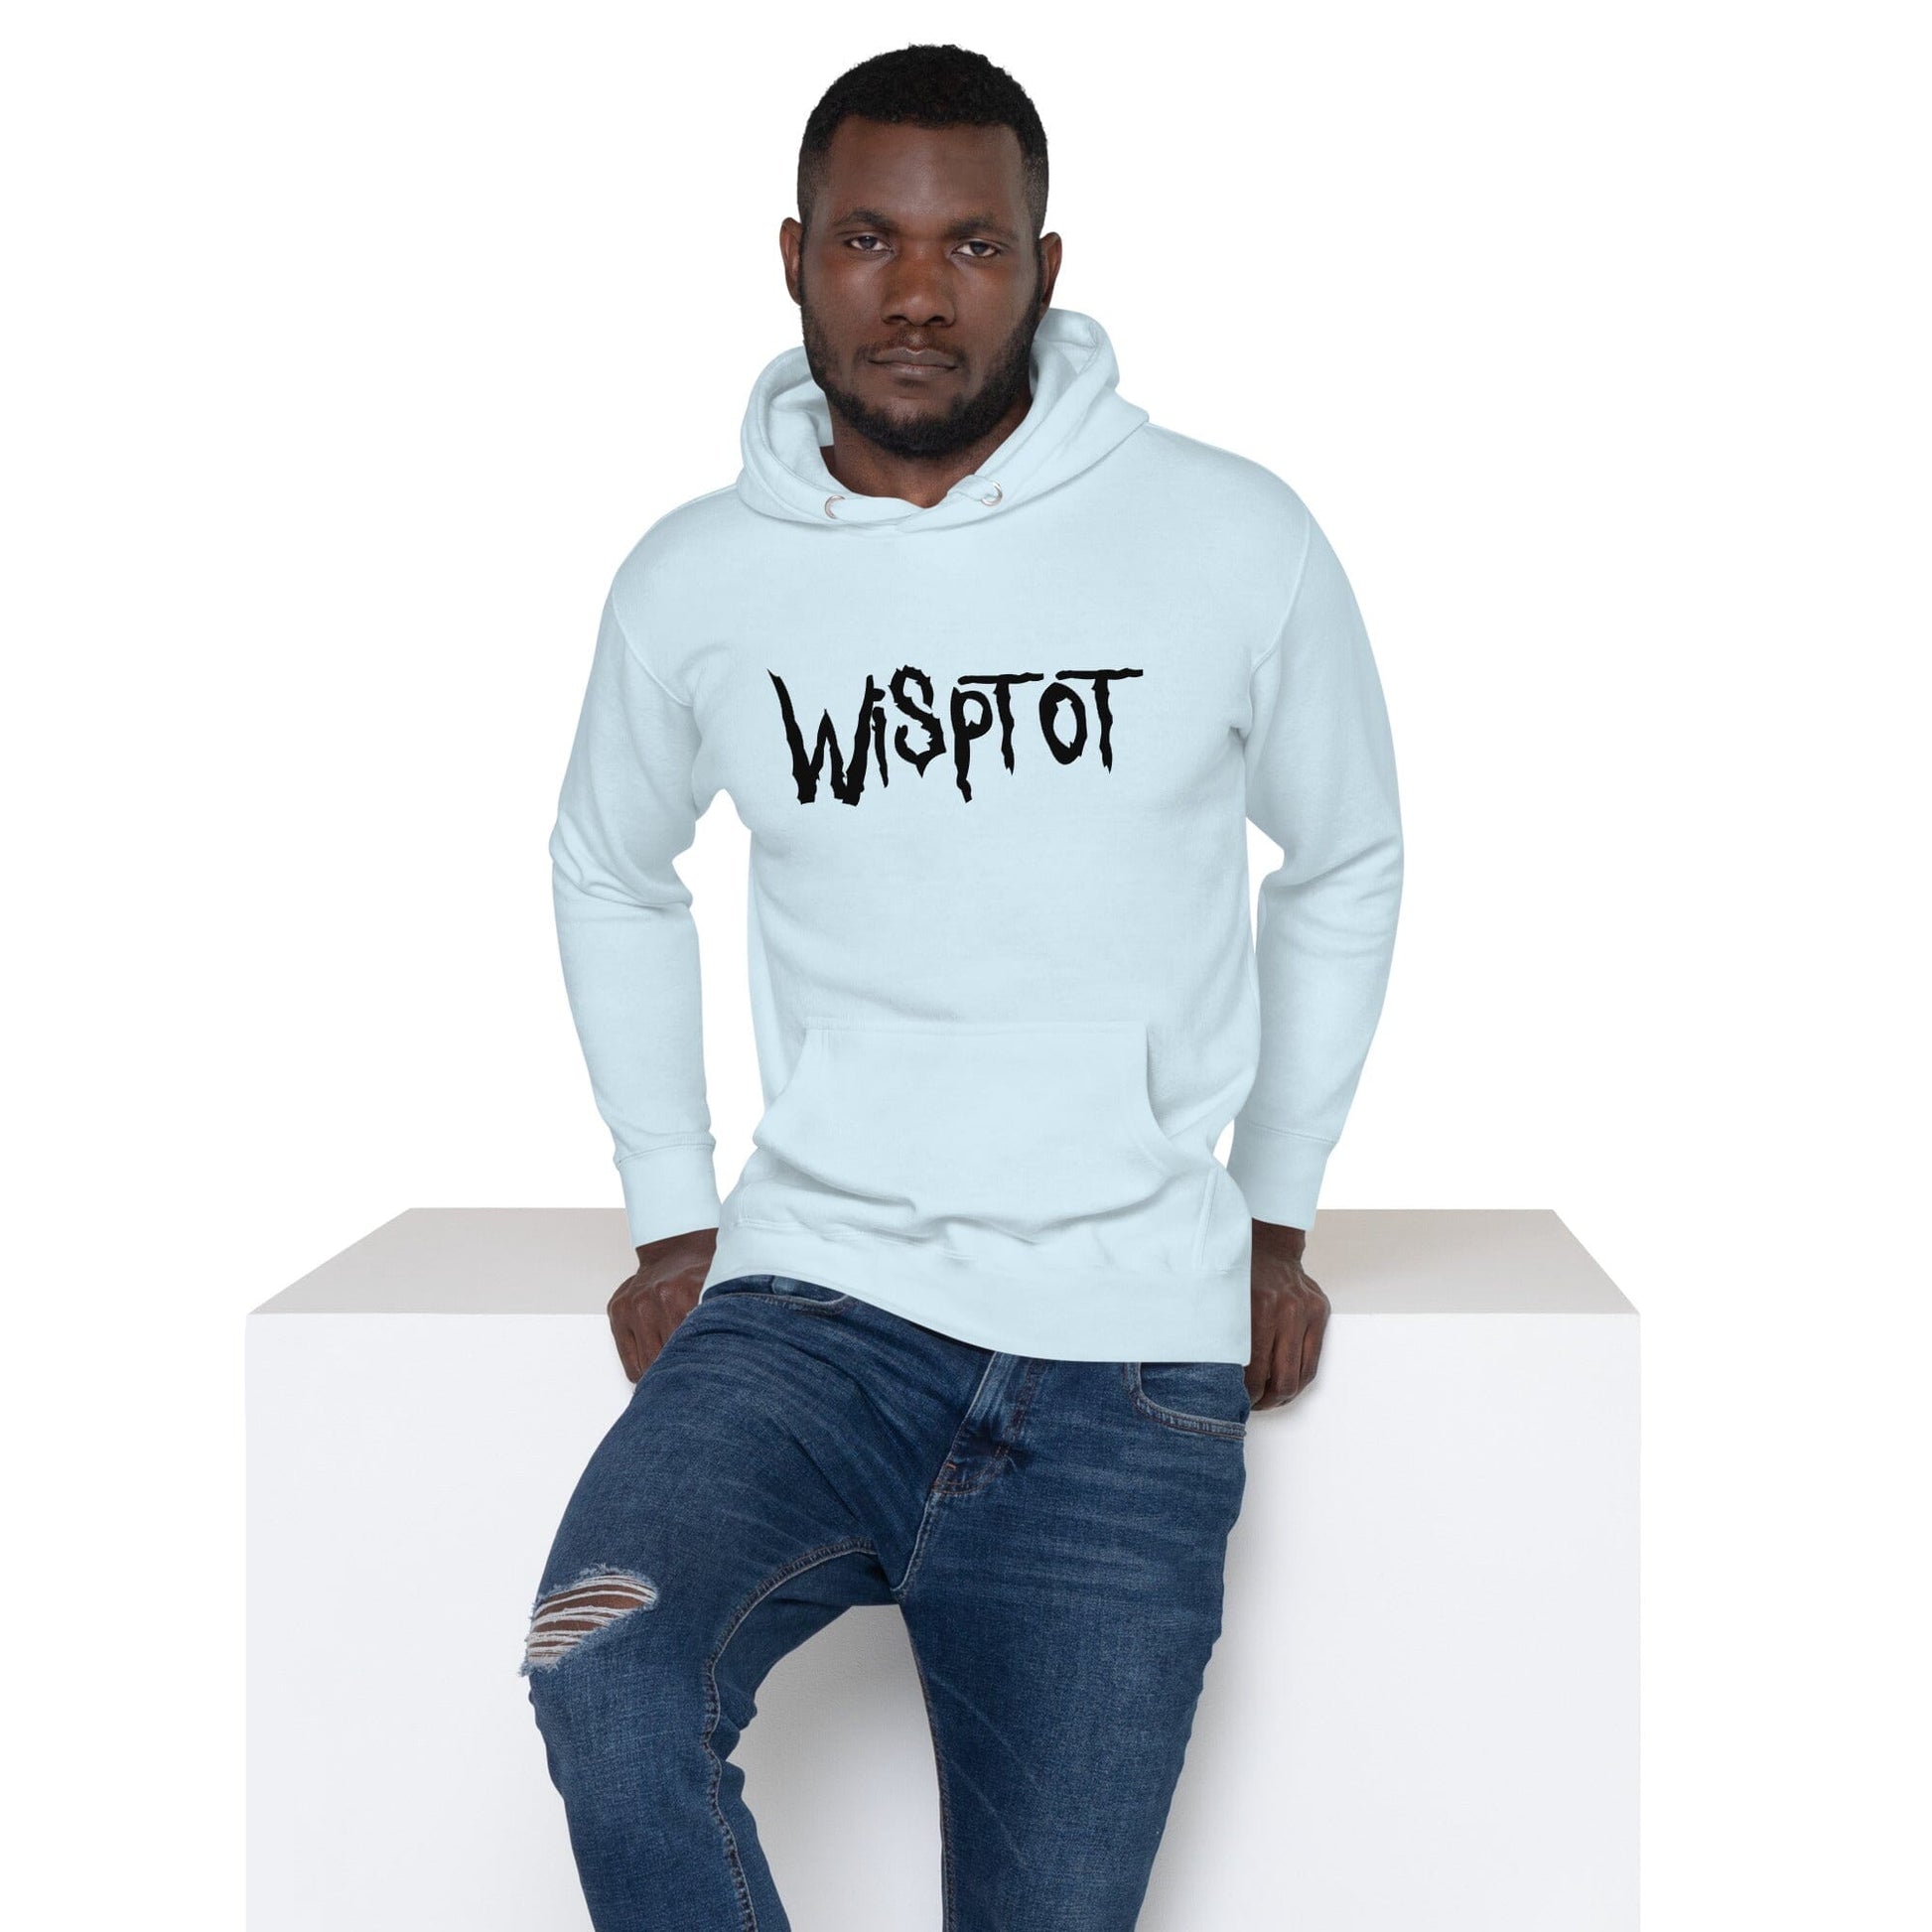 WispTot Hoodie [Unfoiled] (All net proceeds go to equally to Kitty CrusAIDe and Rags to Riches Animal Rescue) JoyousJoyfulJoyness Sky Blue S 